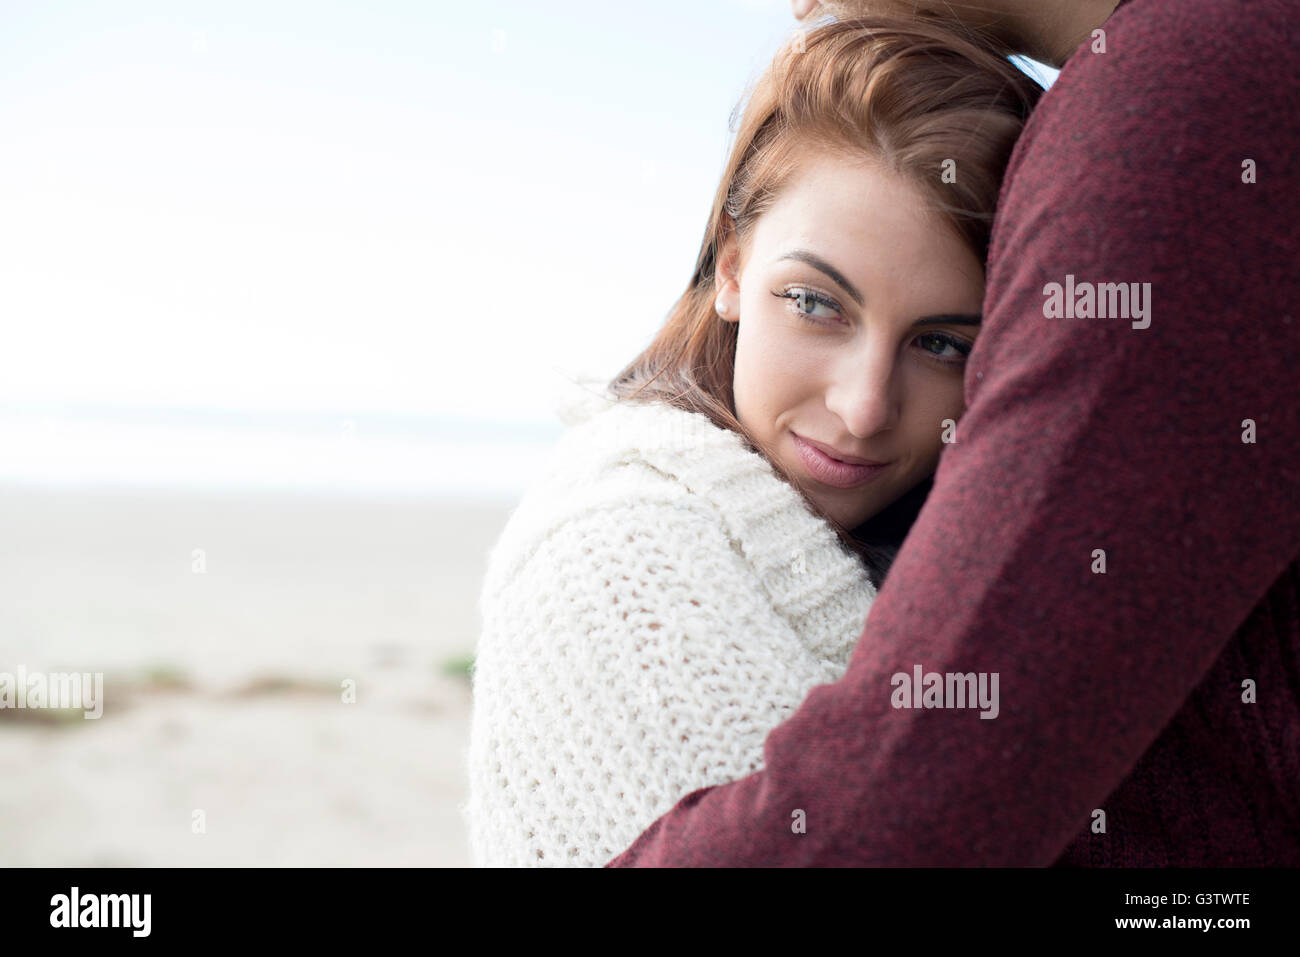 A young couple embracing on the beach at Porthmadog. Stock Photo